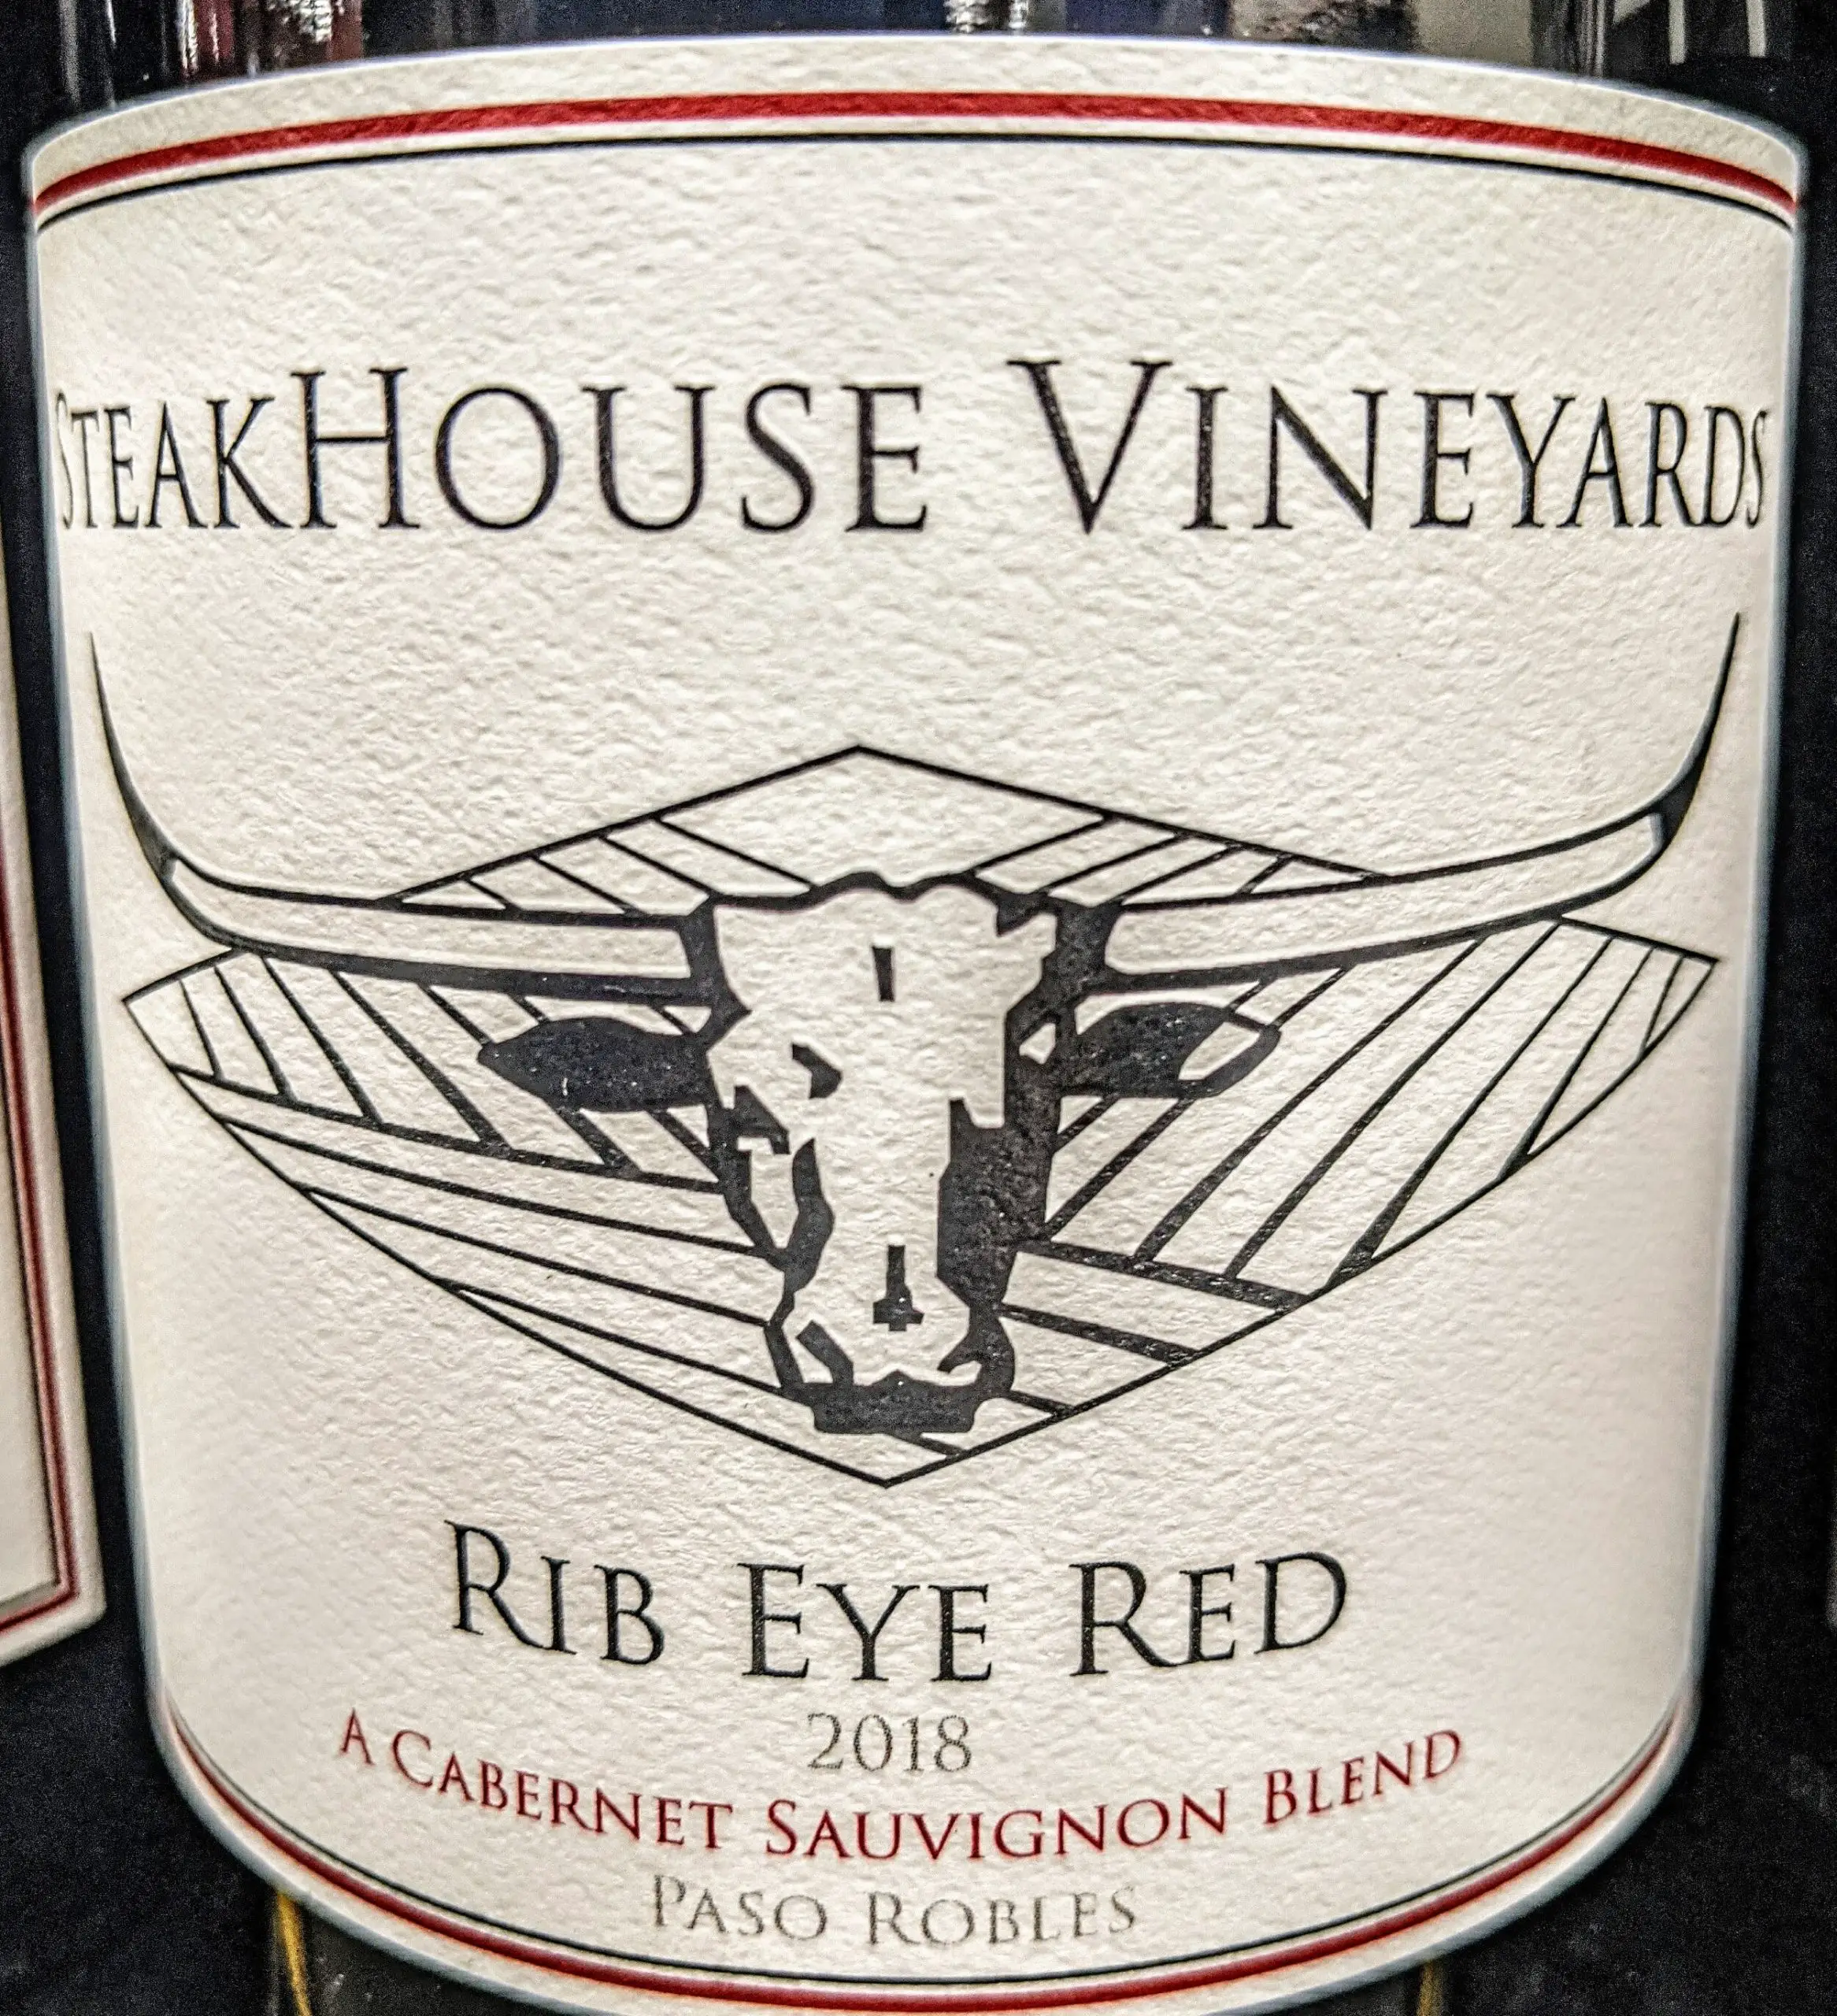 This Rib Eye Red is a prime example of marketing. There are no regulatory minimums when stating that a wine is a ‘Cabernet Sauvignon Blend’. We can assume the wine has some percentage of Cabernet Sauvignon in it, but a different varietal could dominate the blend.